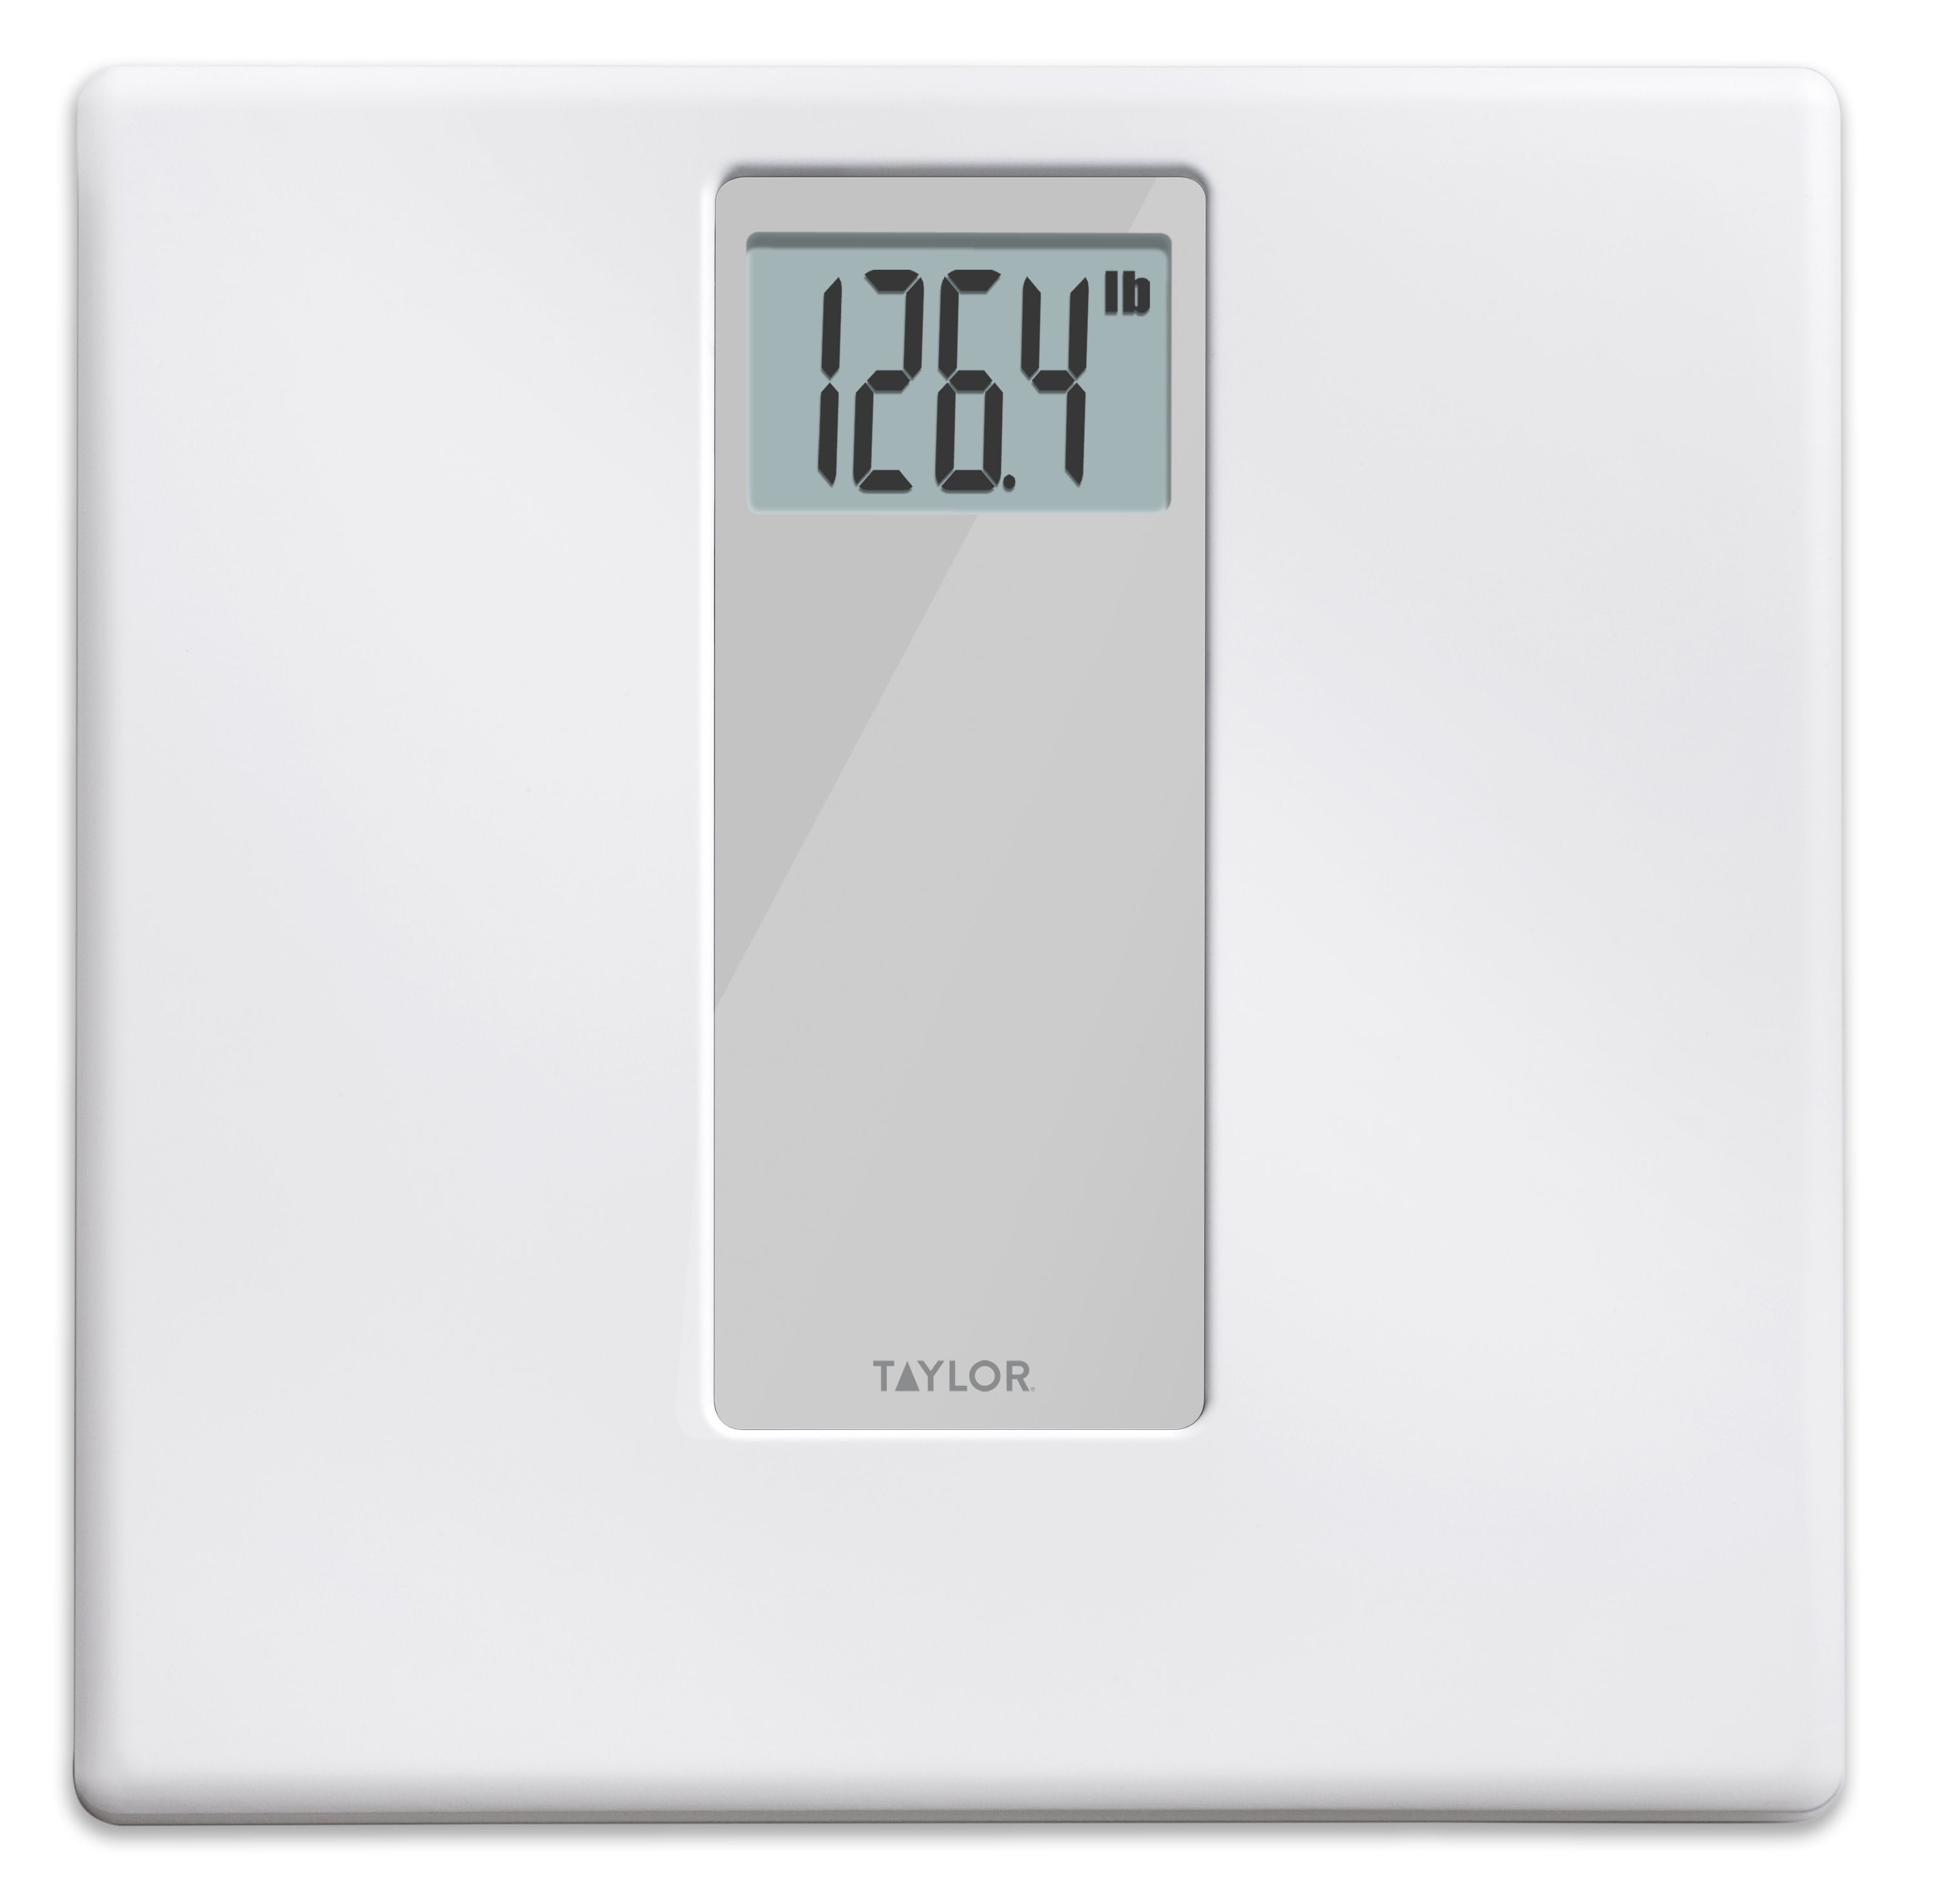 BEAUTURAL Digital Bathroom Scale for Body Weight, LCD Display, 400lb, 4 AAA  Batteries and Tape Measure Included,Tempered Glass